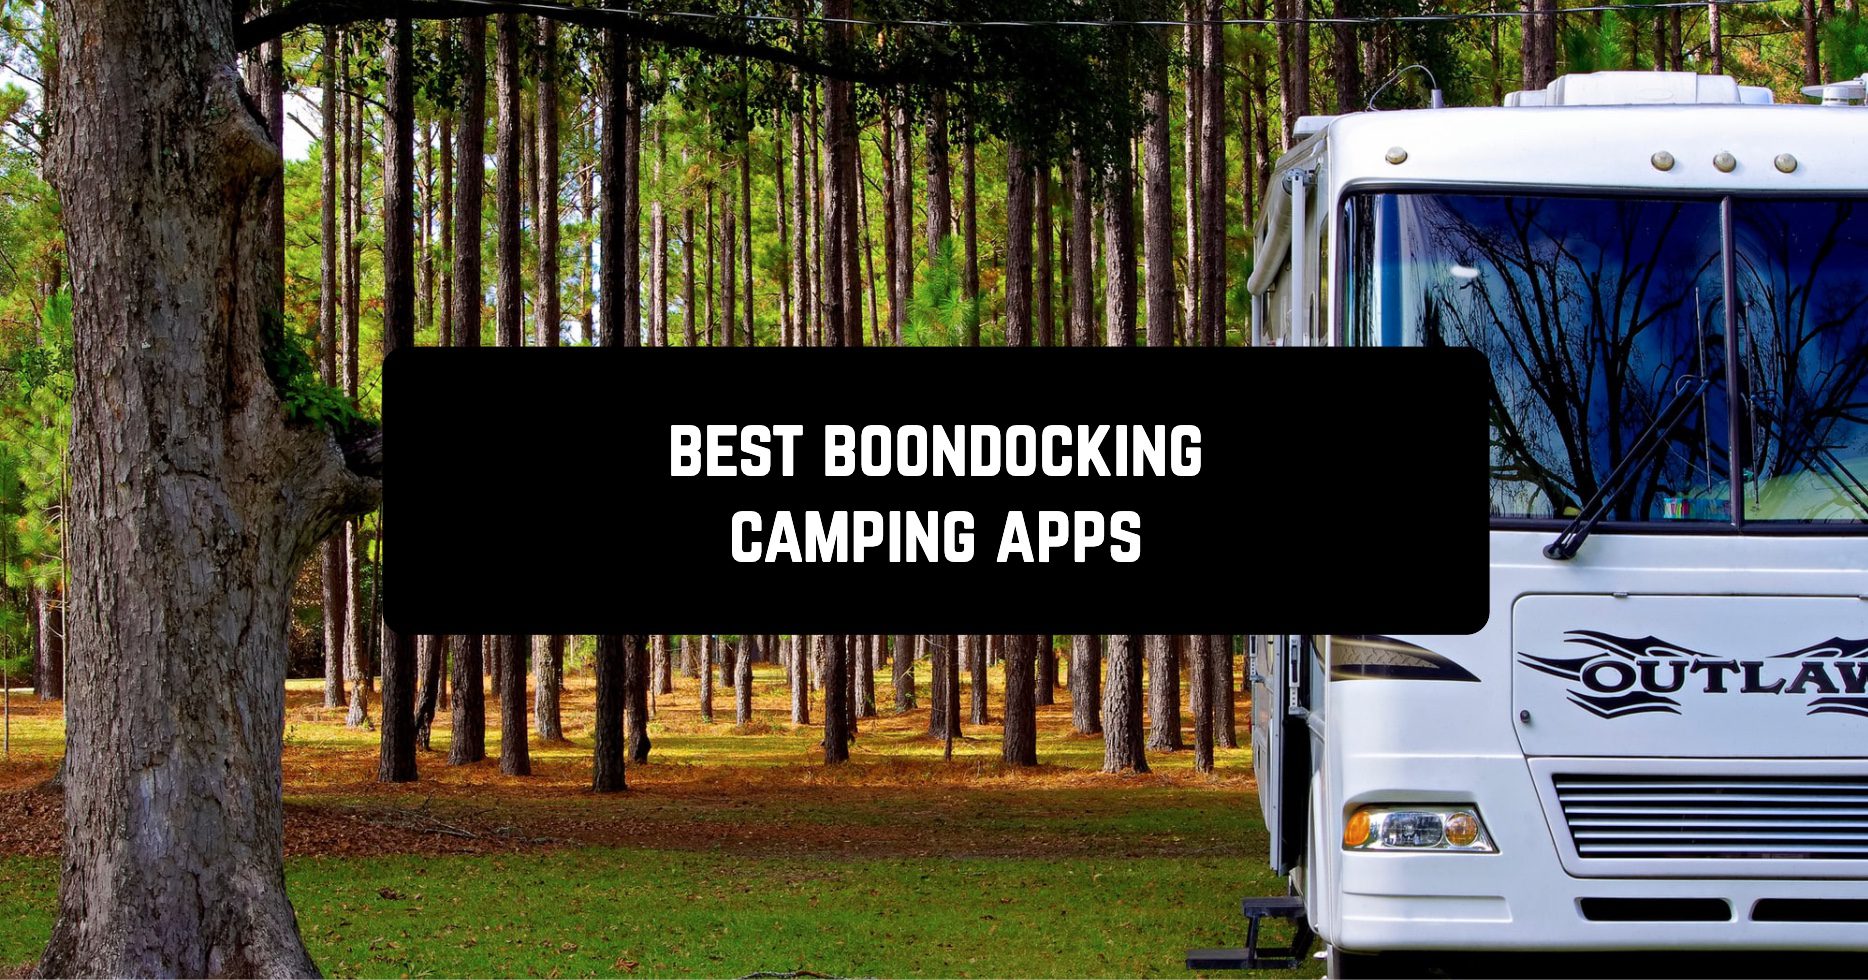 Best boondocking camping apps